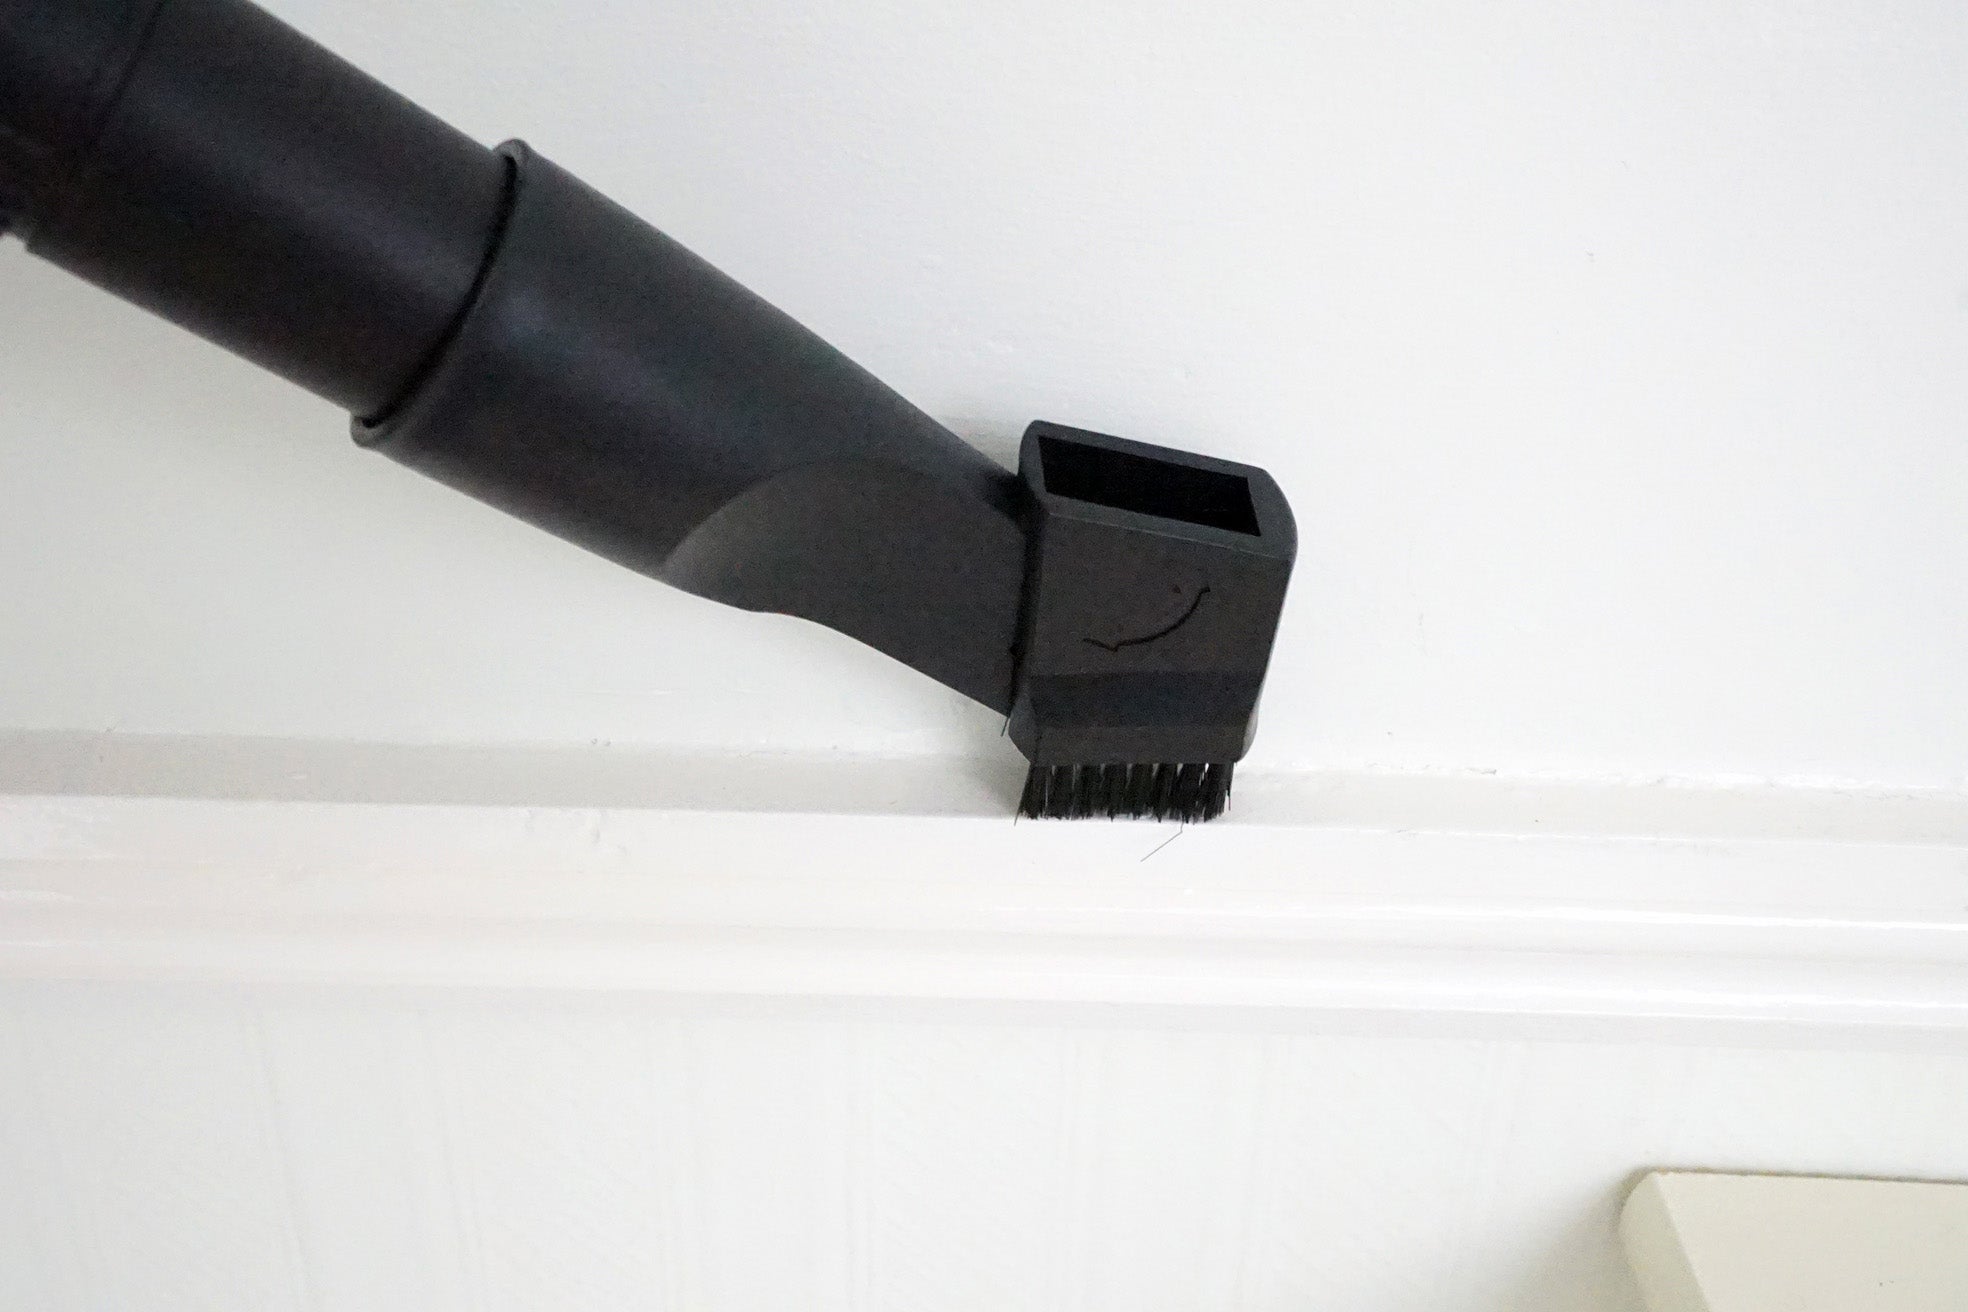 Vacuum cleaner nozzle cleaning a white baseboard.